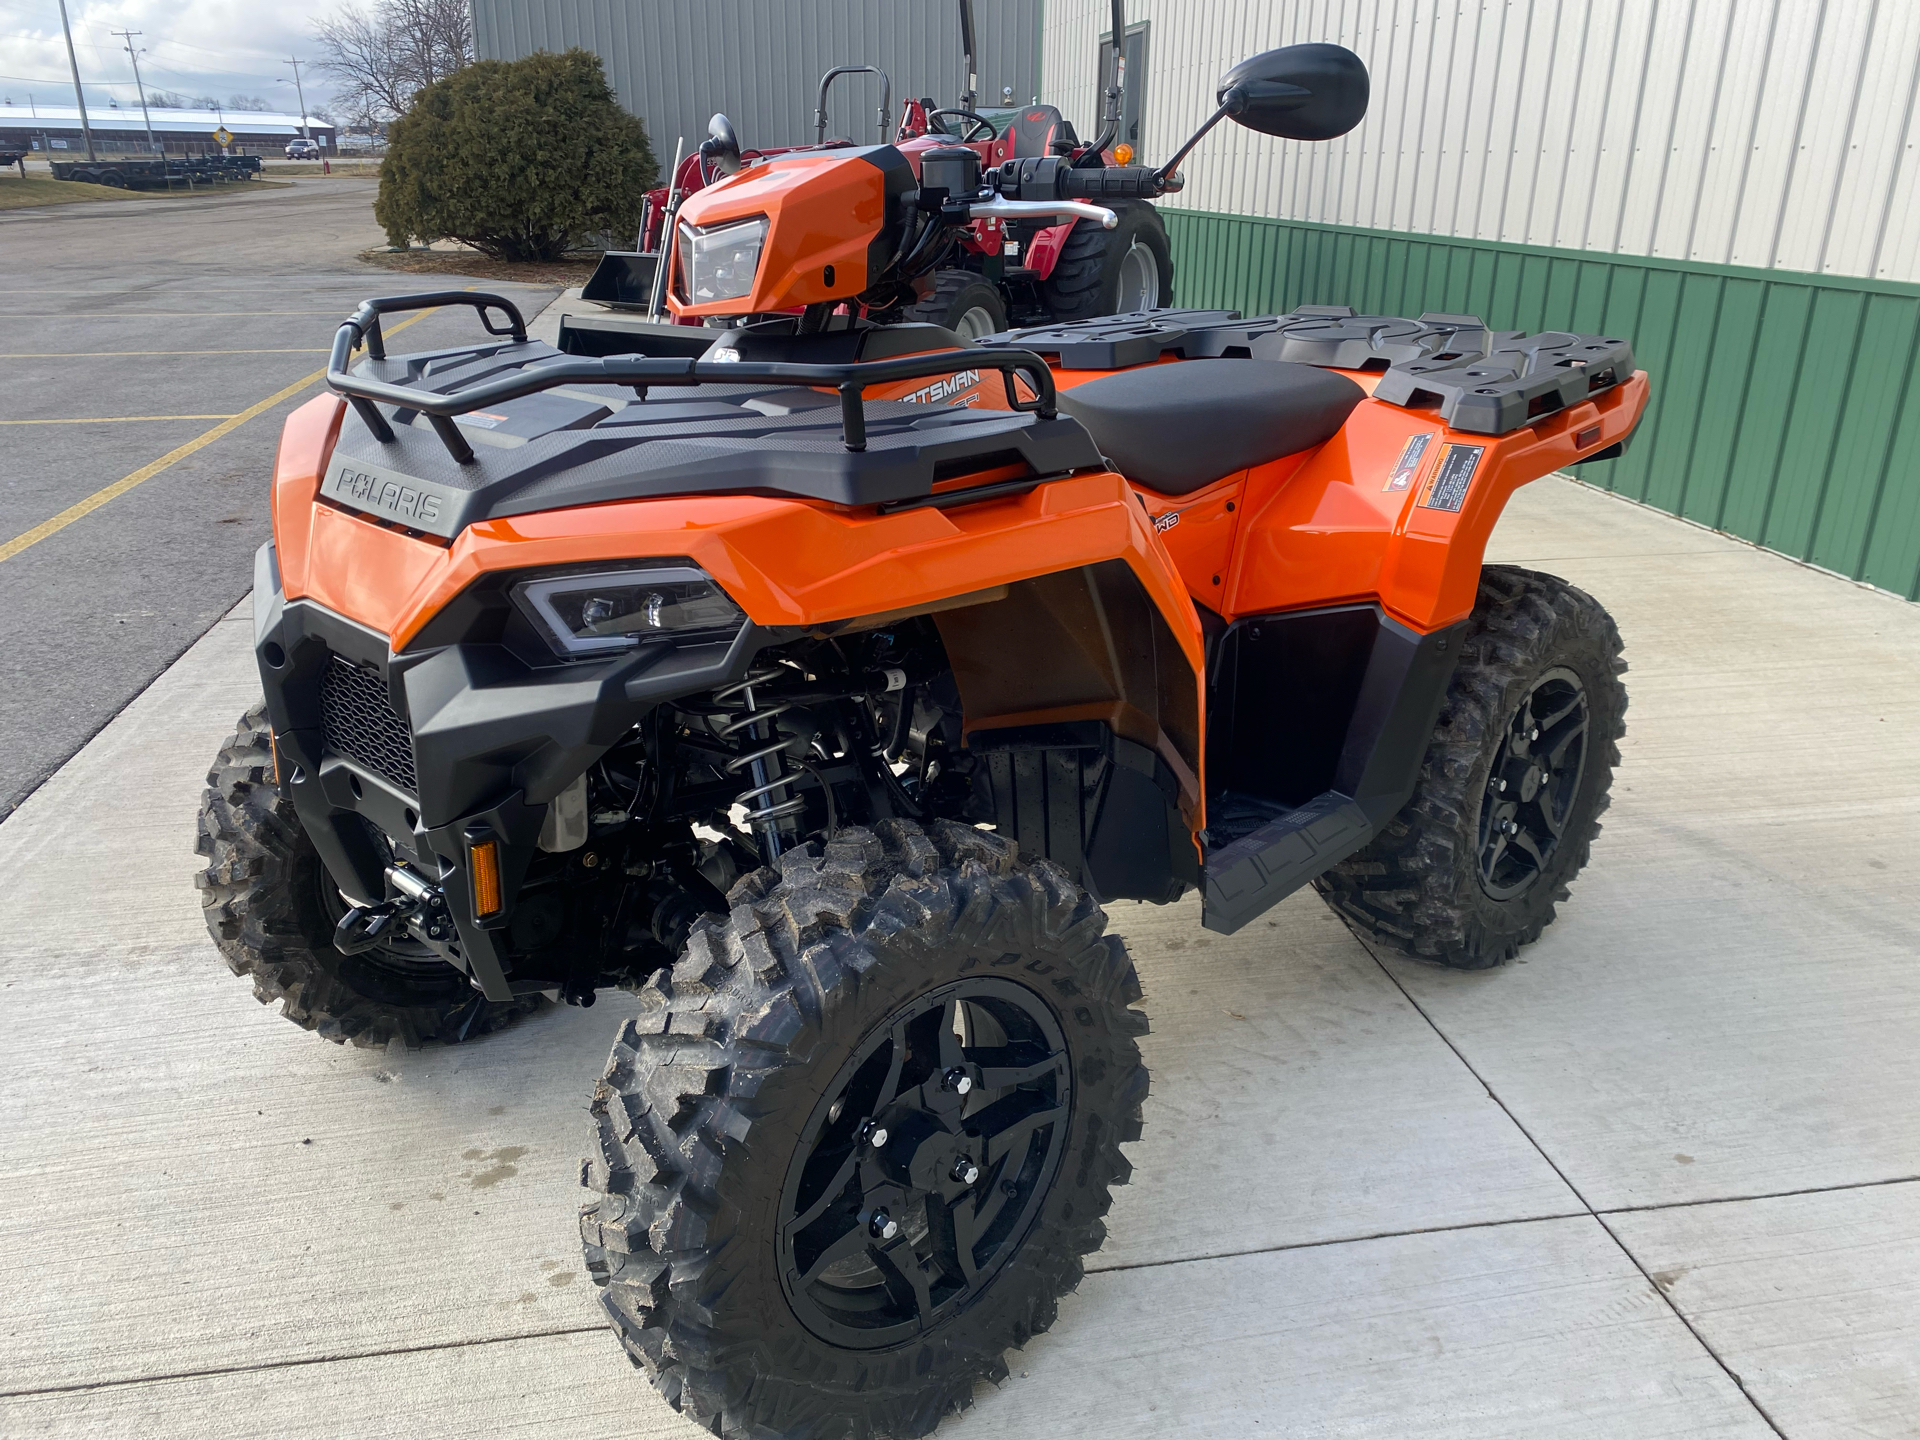 2022 Polaris Sportsman 570 Ultimate Trail Limited Edition in Elkhorn, Wisconsin - Photo 2